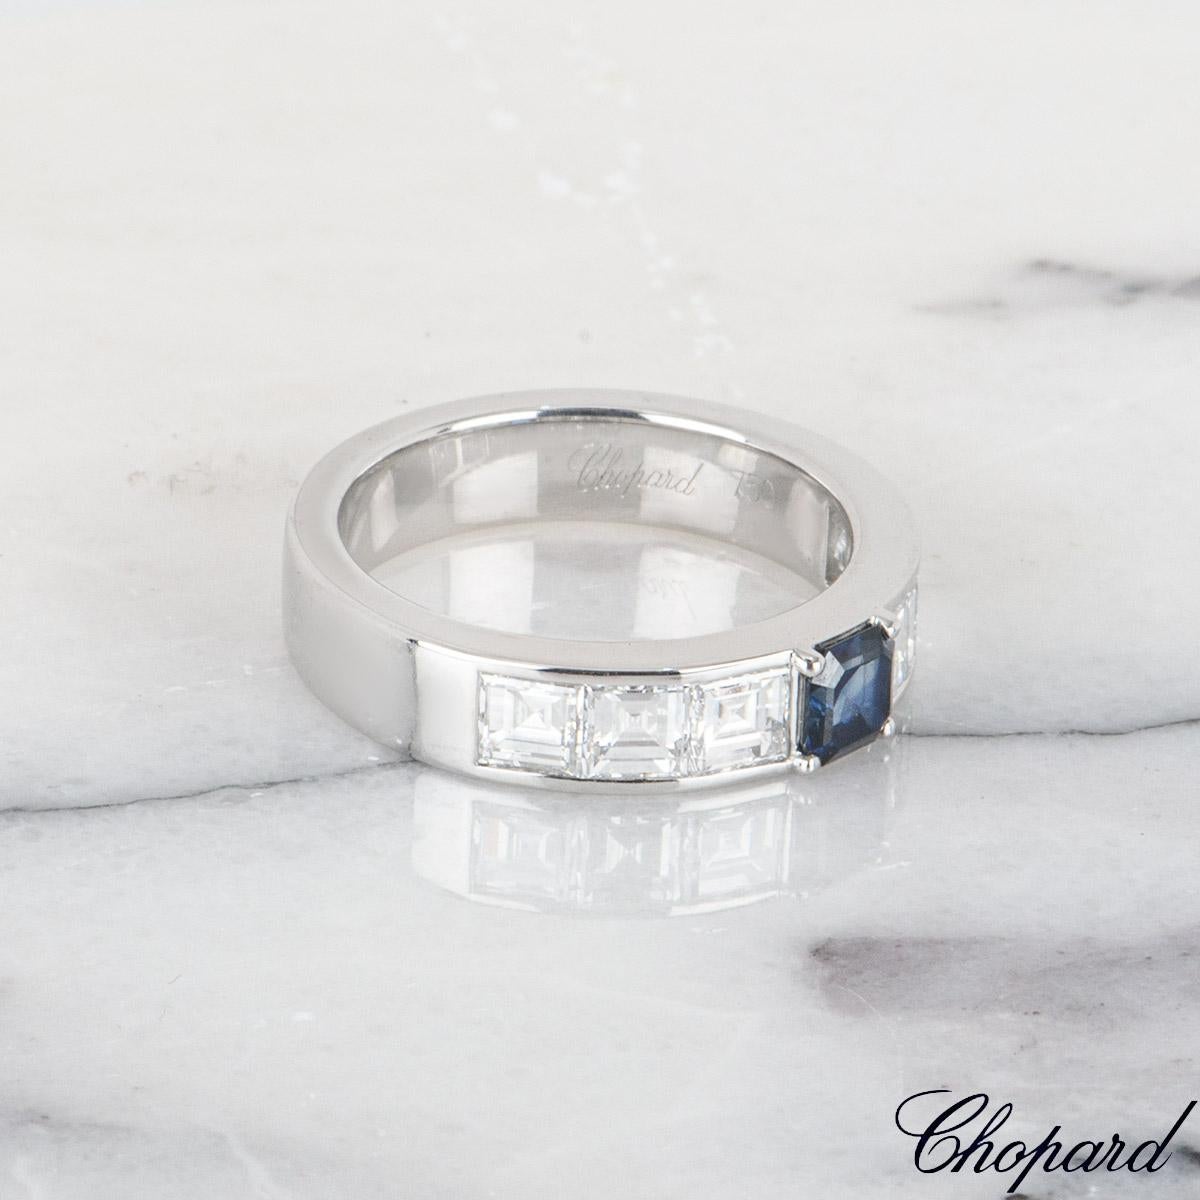 Chopard White Gold Sapphire & Diamond Ring 82/6622-1111 In New Condition For Sale In London, GB